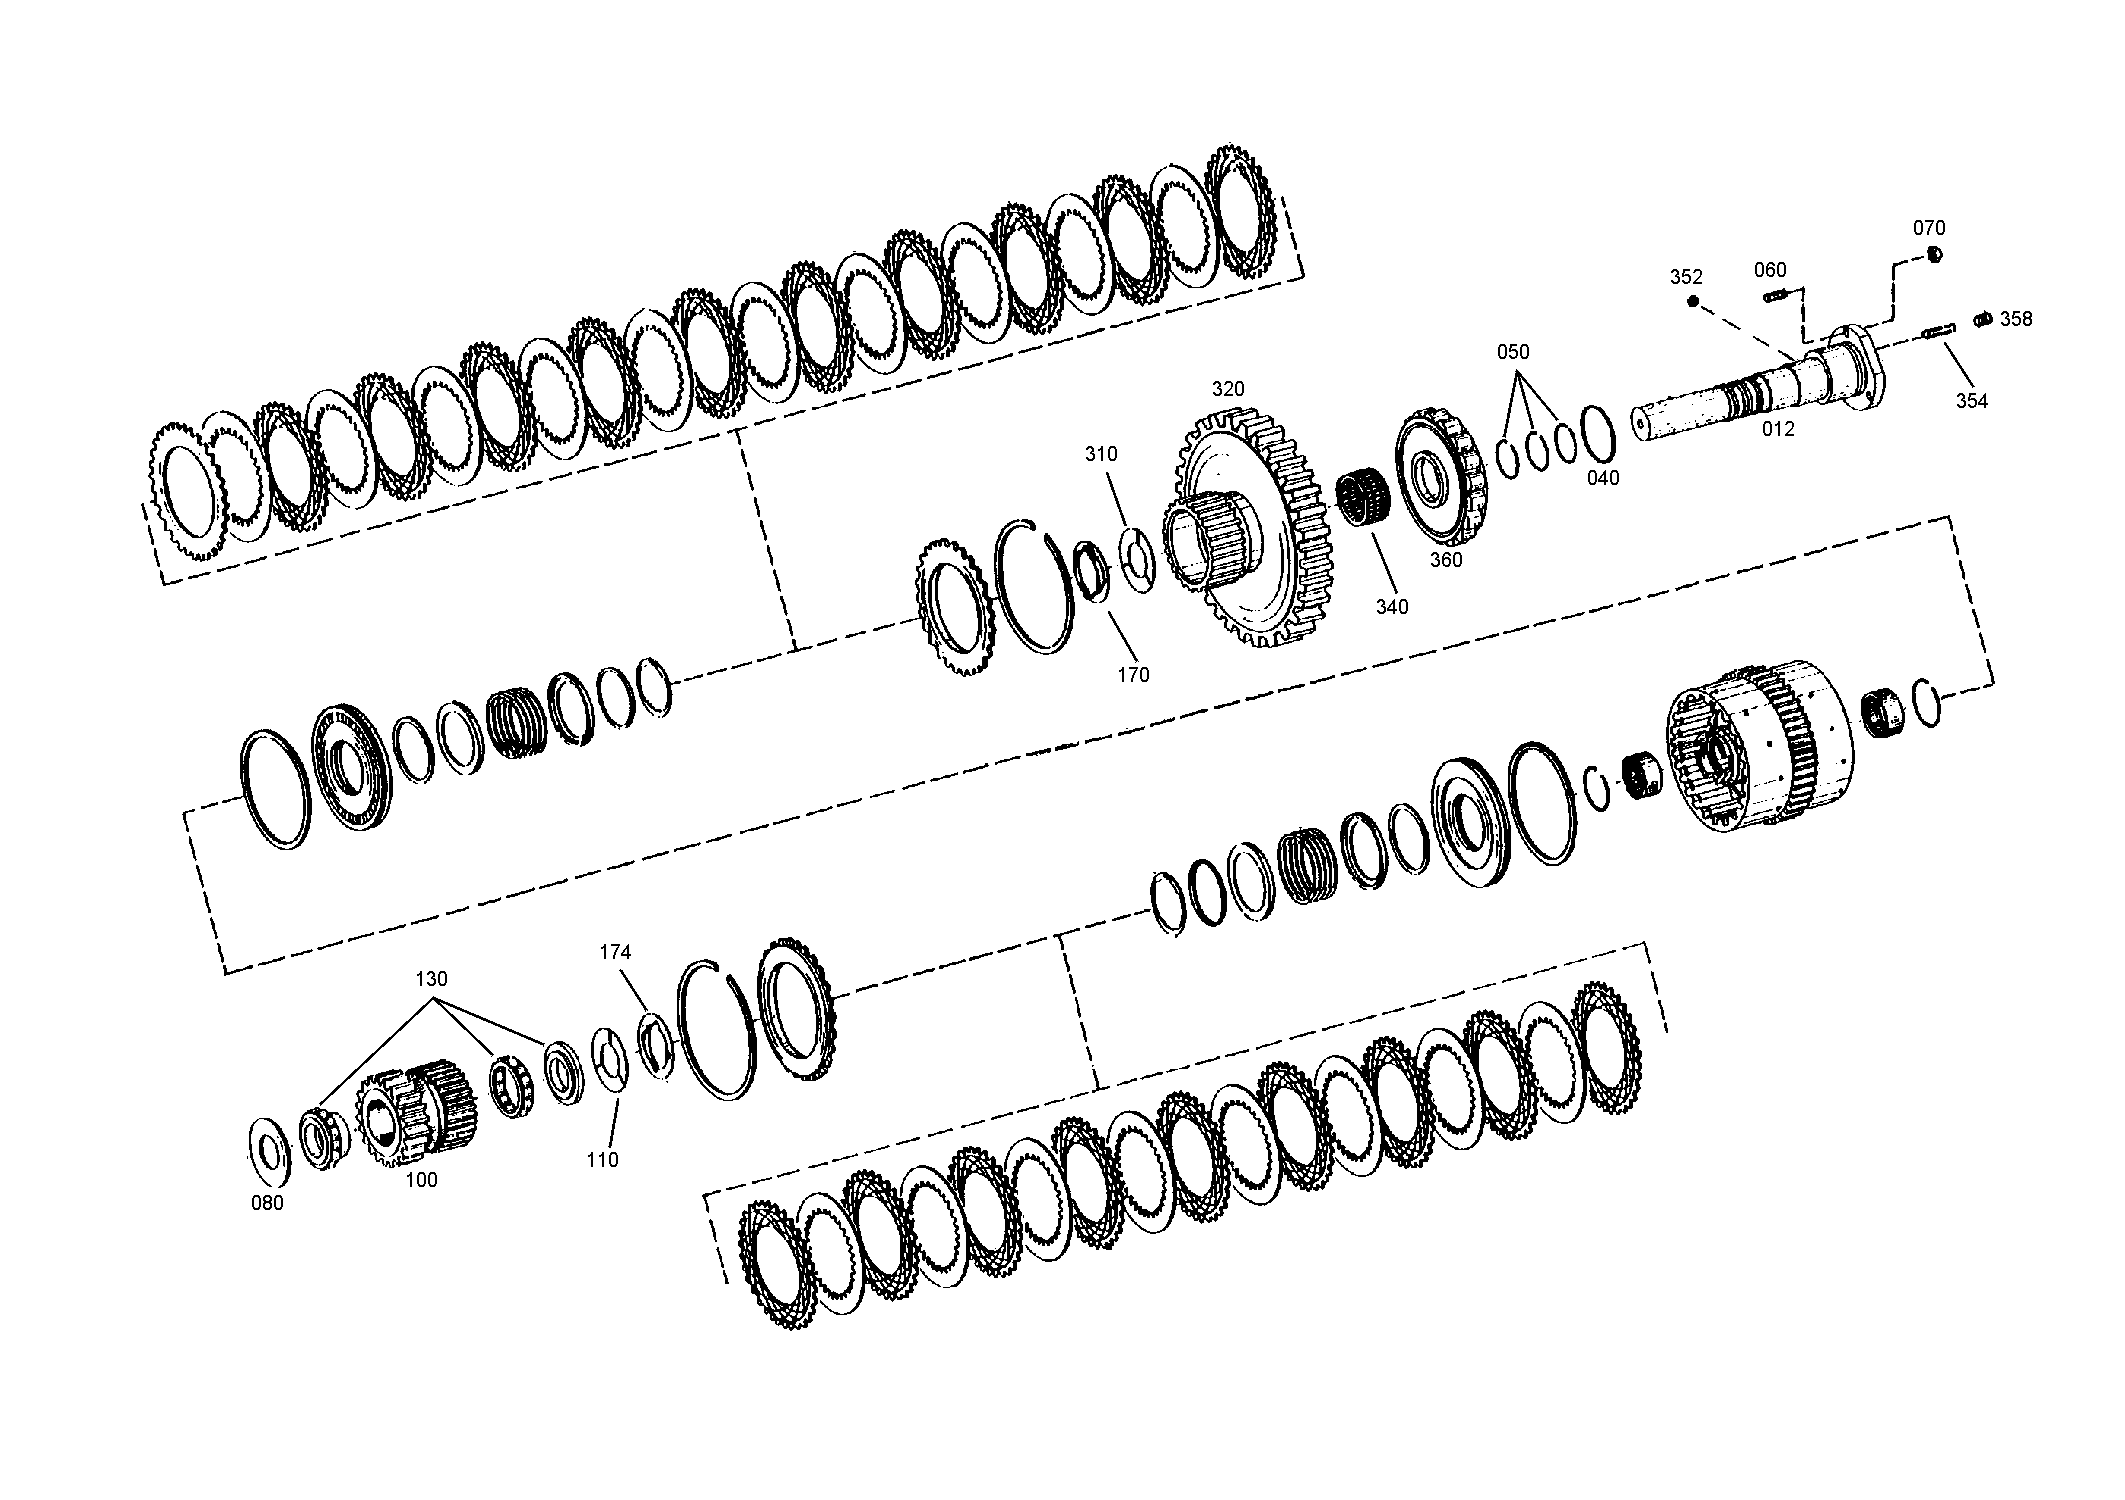 drawing for MOXY TRUCKS AS 252577 - ROLLER BEARING (figure 4)